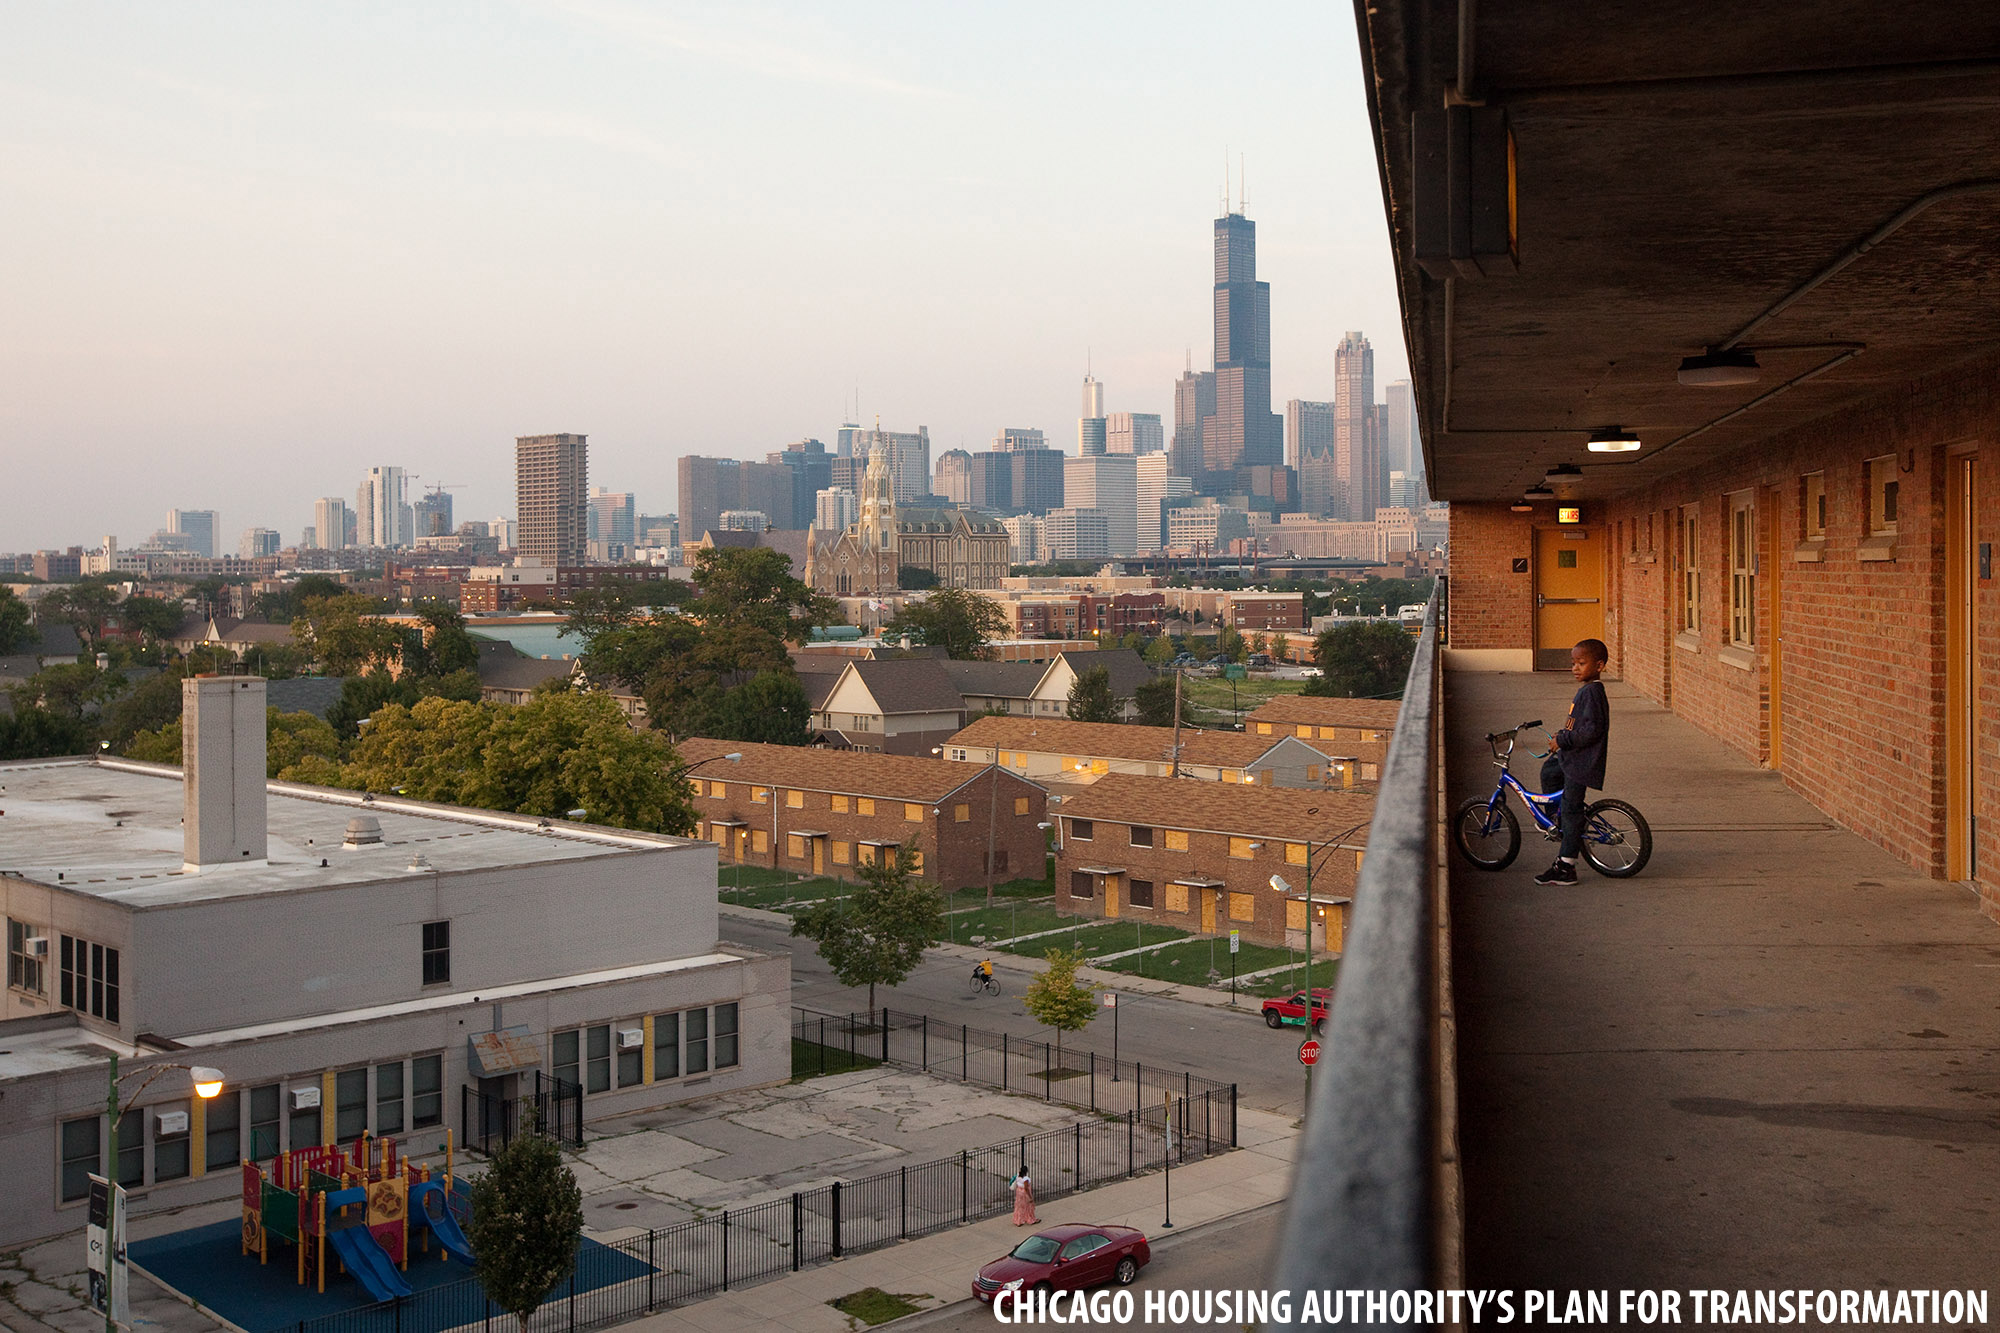 Chicago Housing Authority's Plan for Transformation